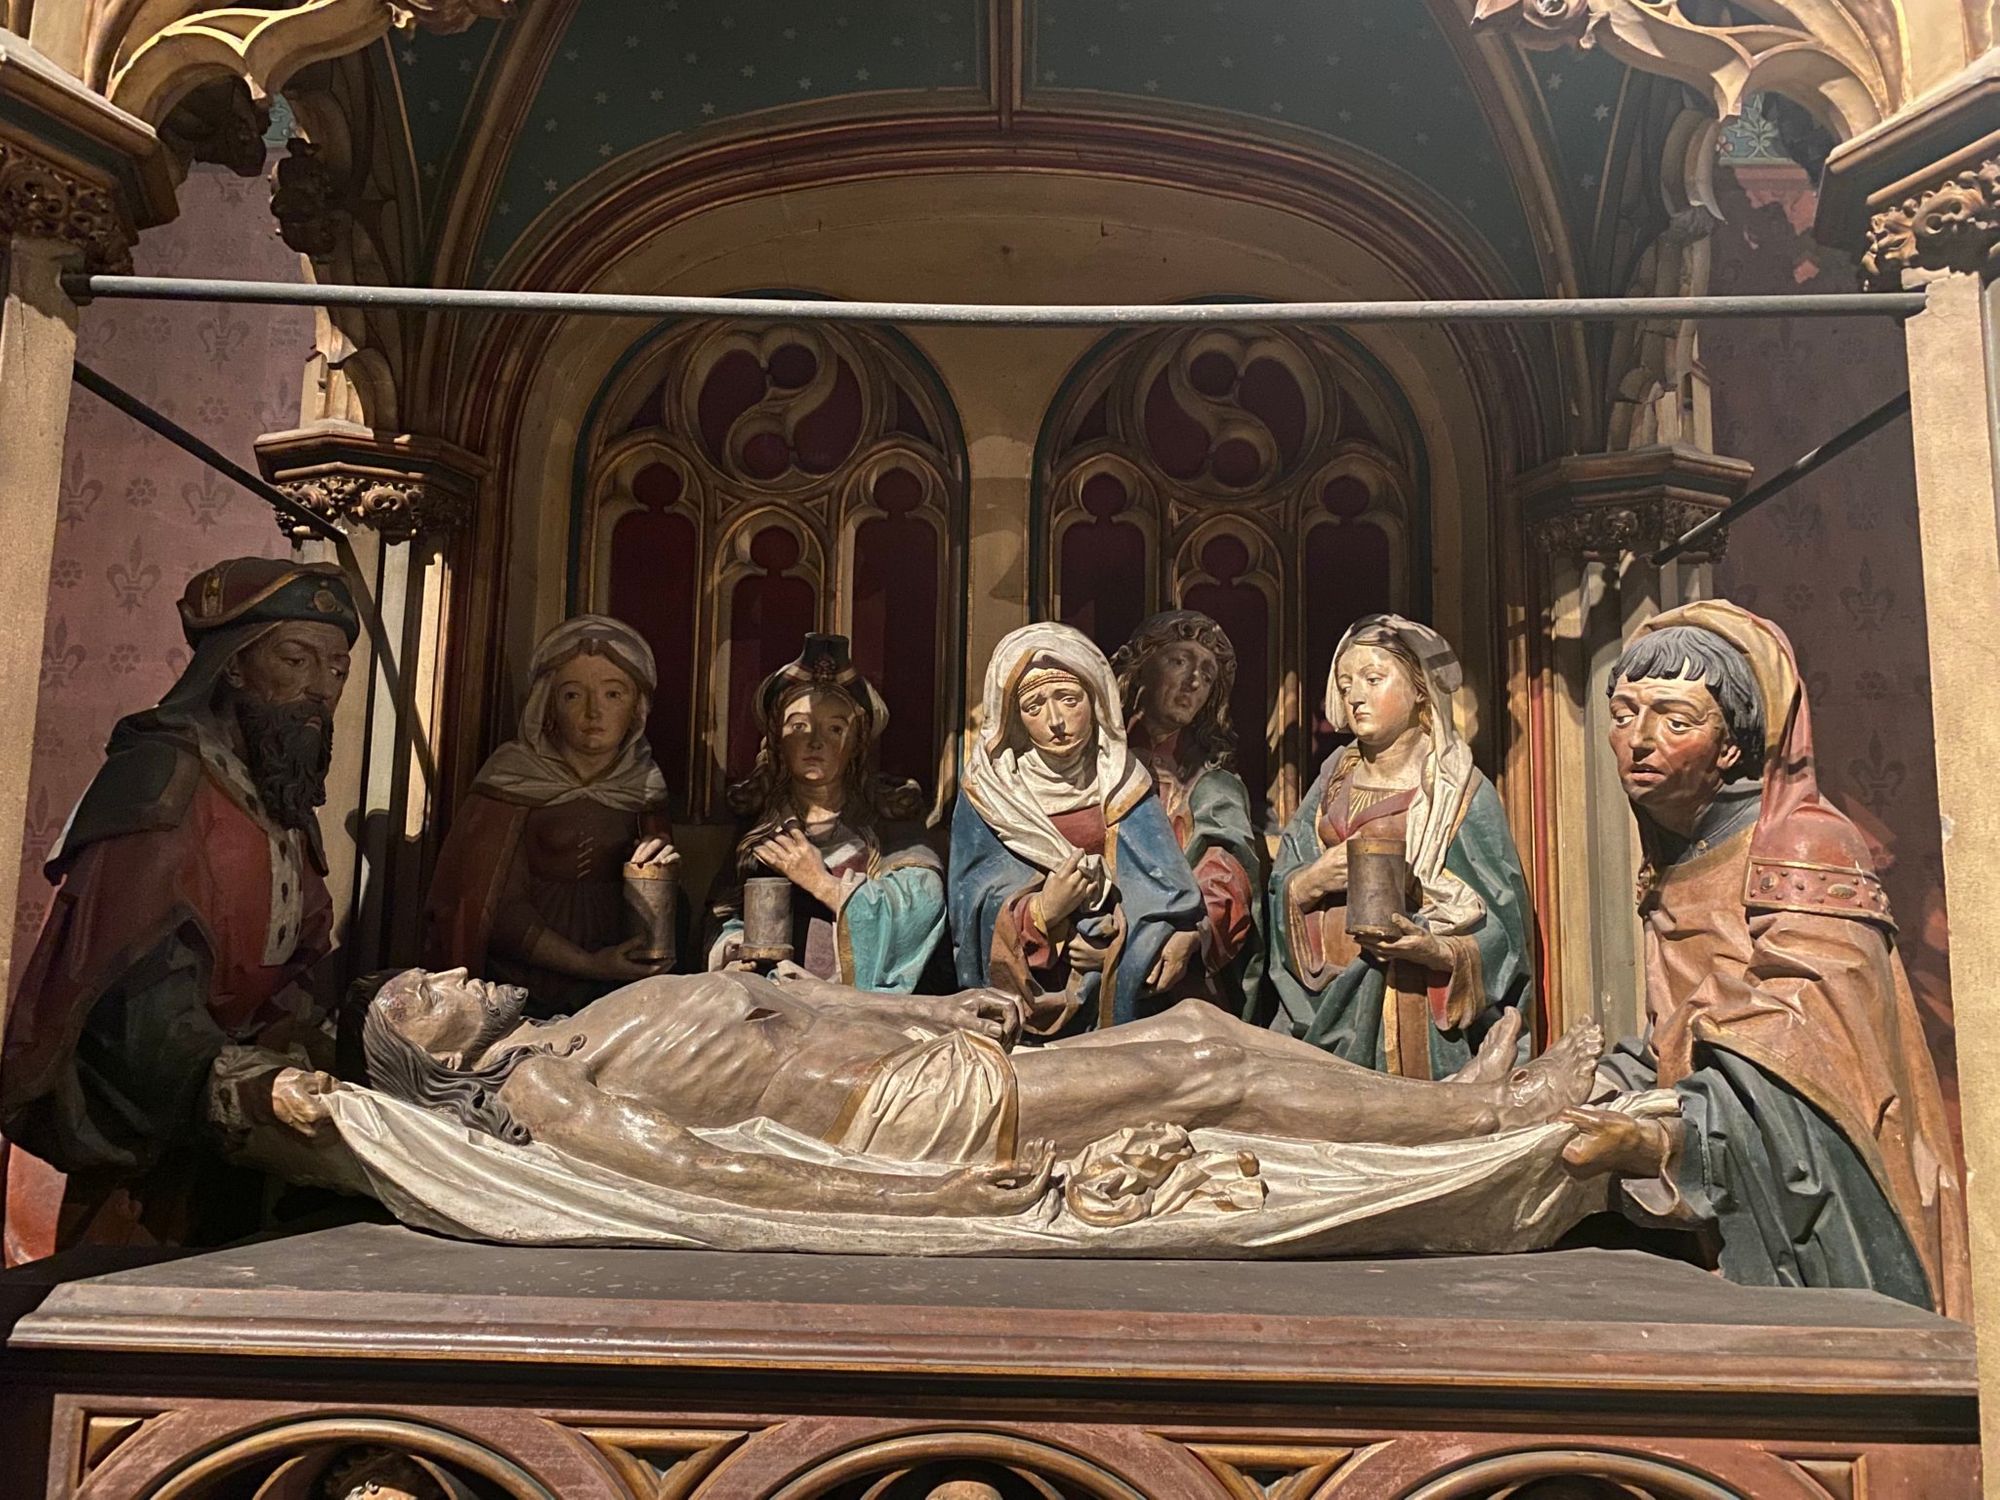 Wooden statues showing Jesus lying dead on a shroud with the Virgin Mary standing beside him and other men and women looking on